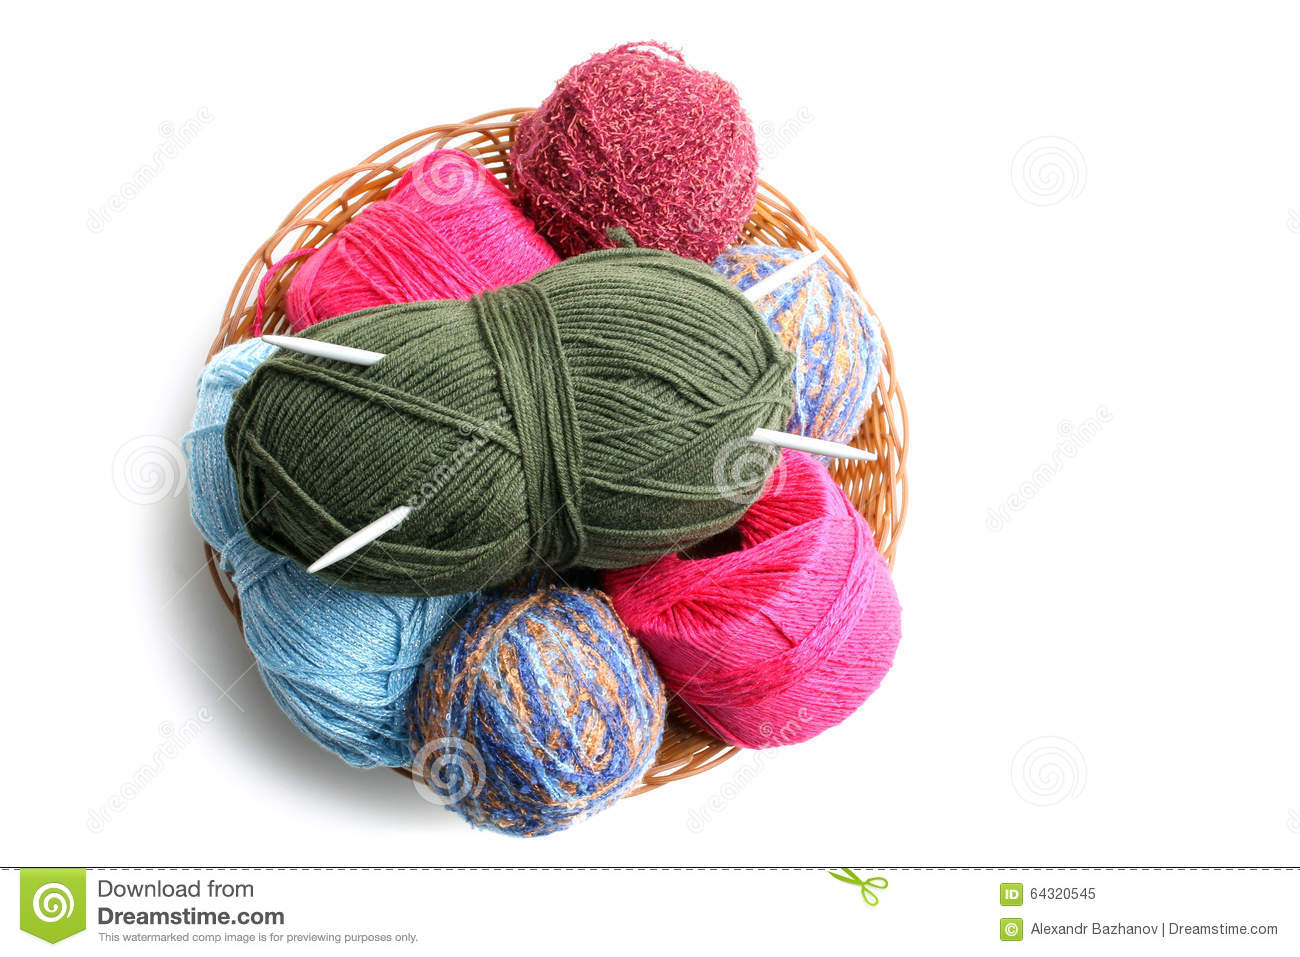 Colorful Yarn For Knitting With Knitting Needles In A Wicker Basket On